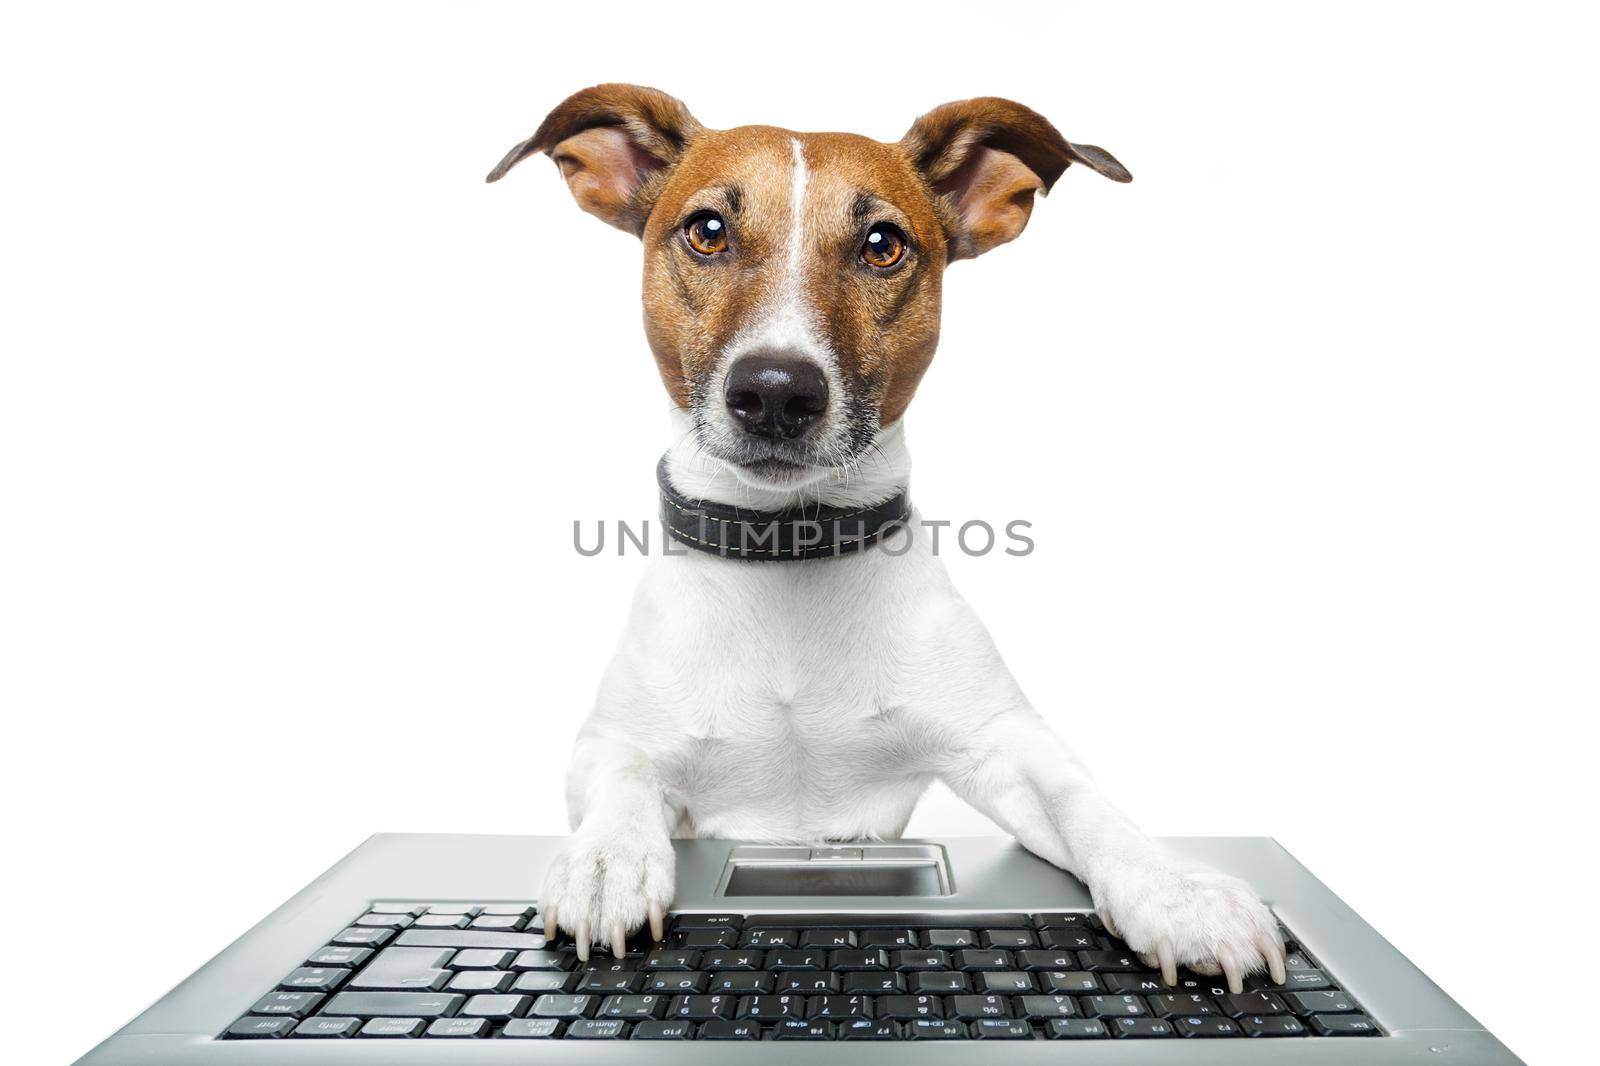 dog computer pc tablet by Brosch